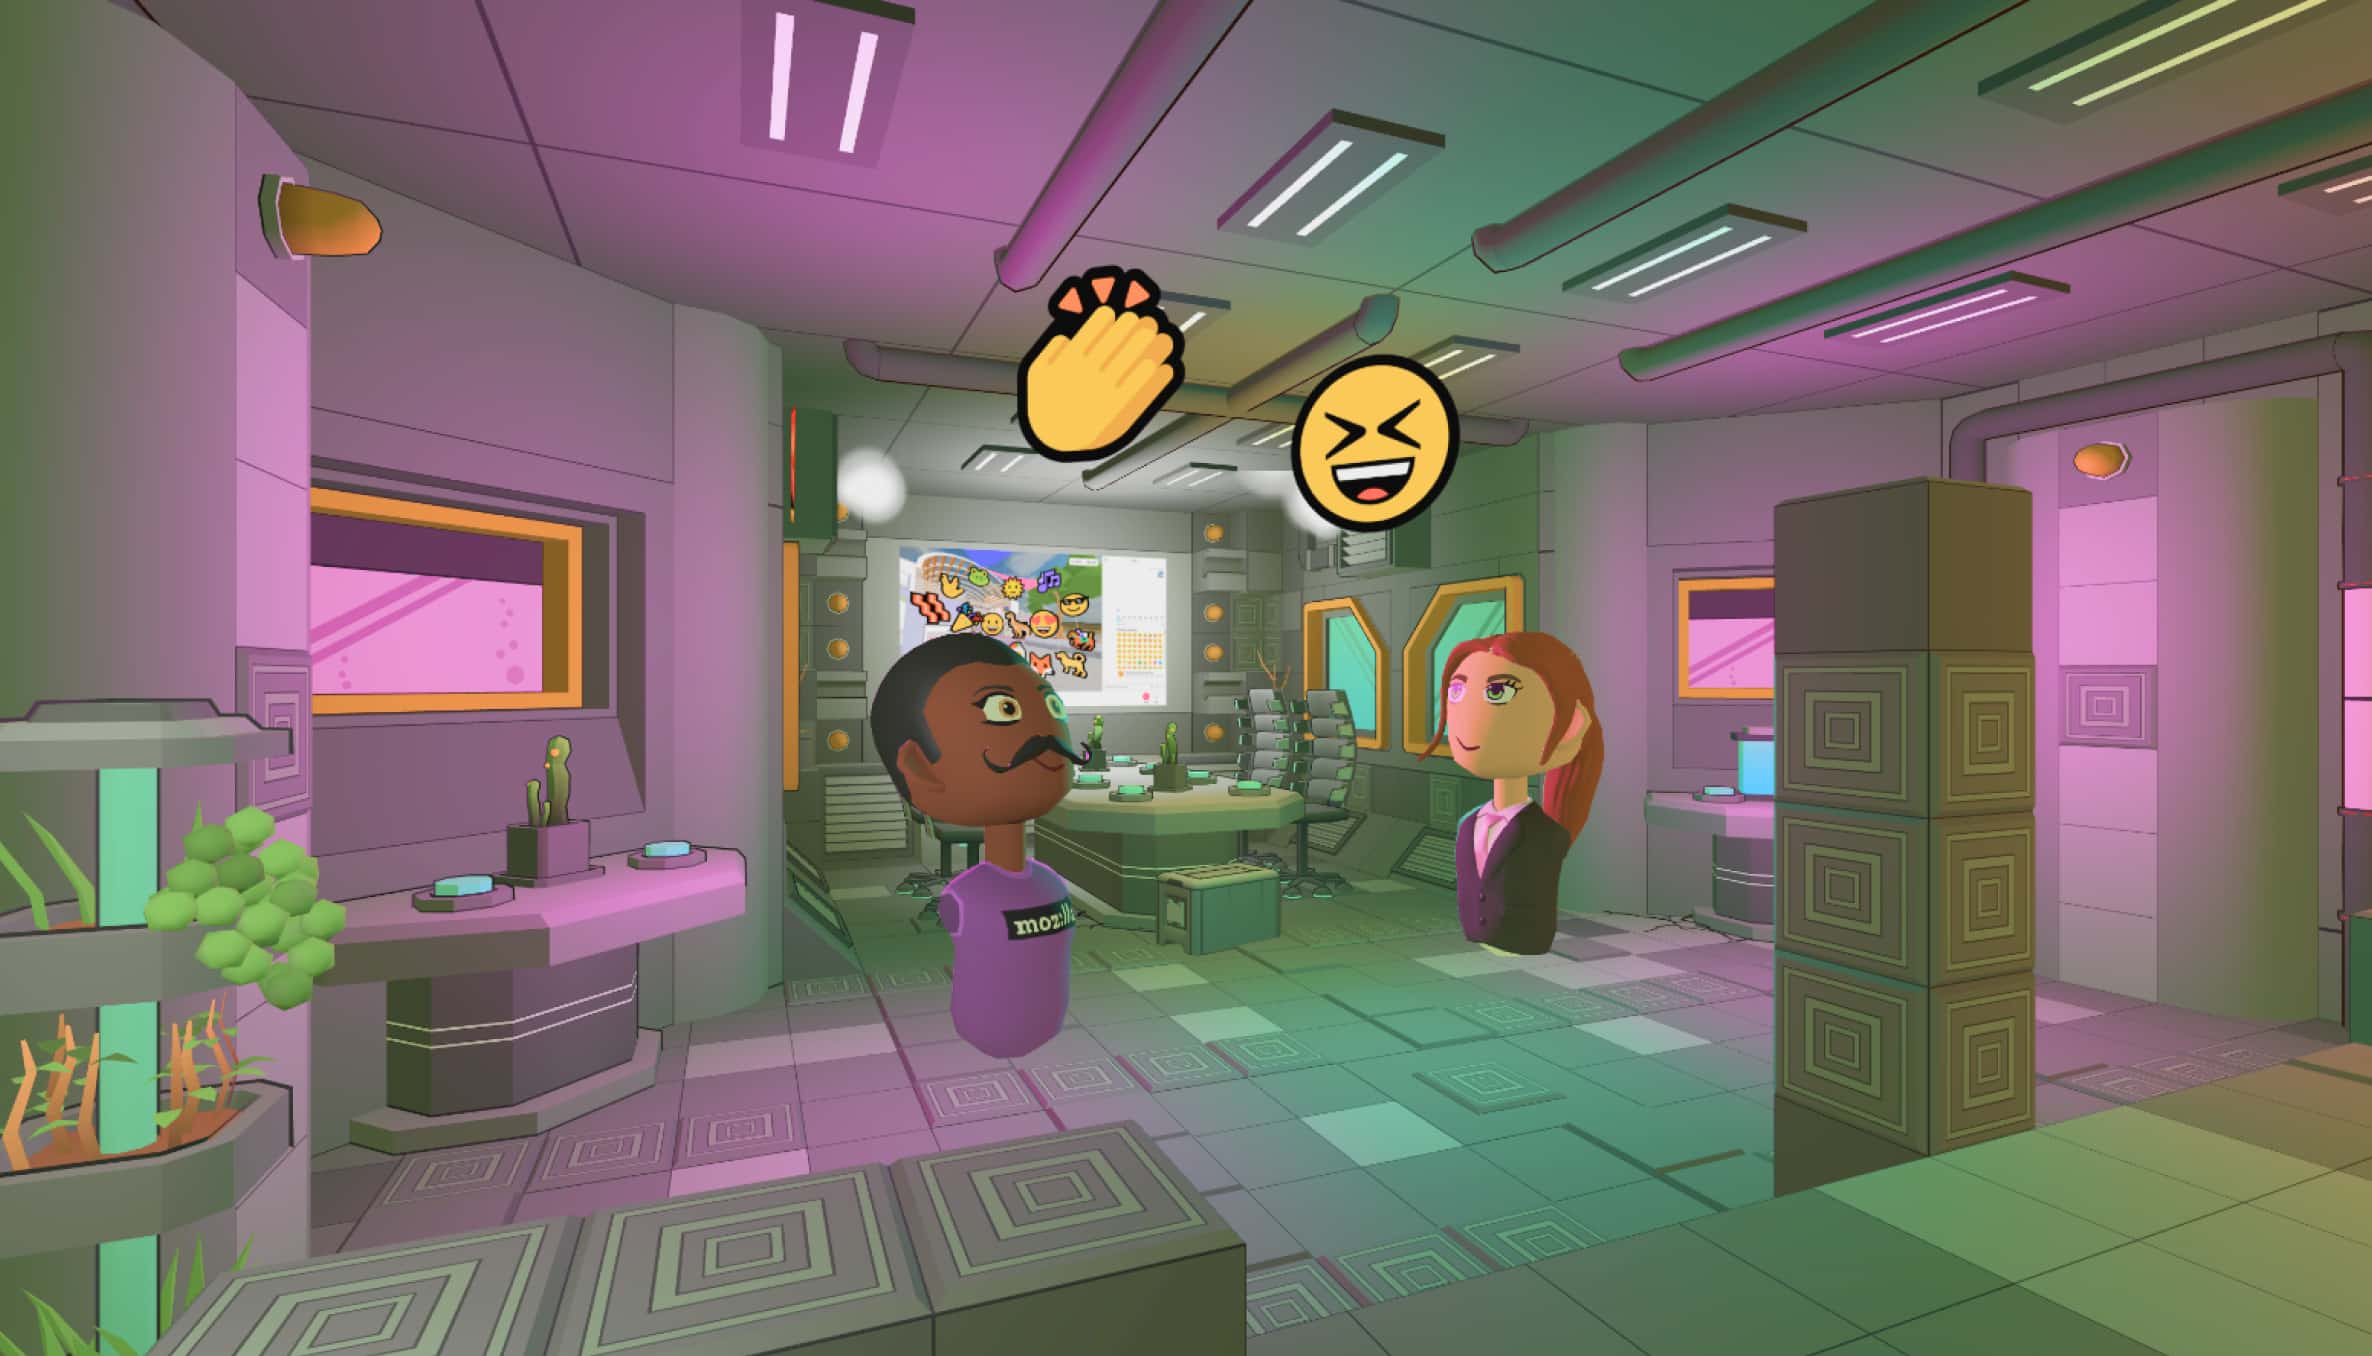 Two avatars in a virtual space making emojis